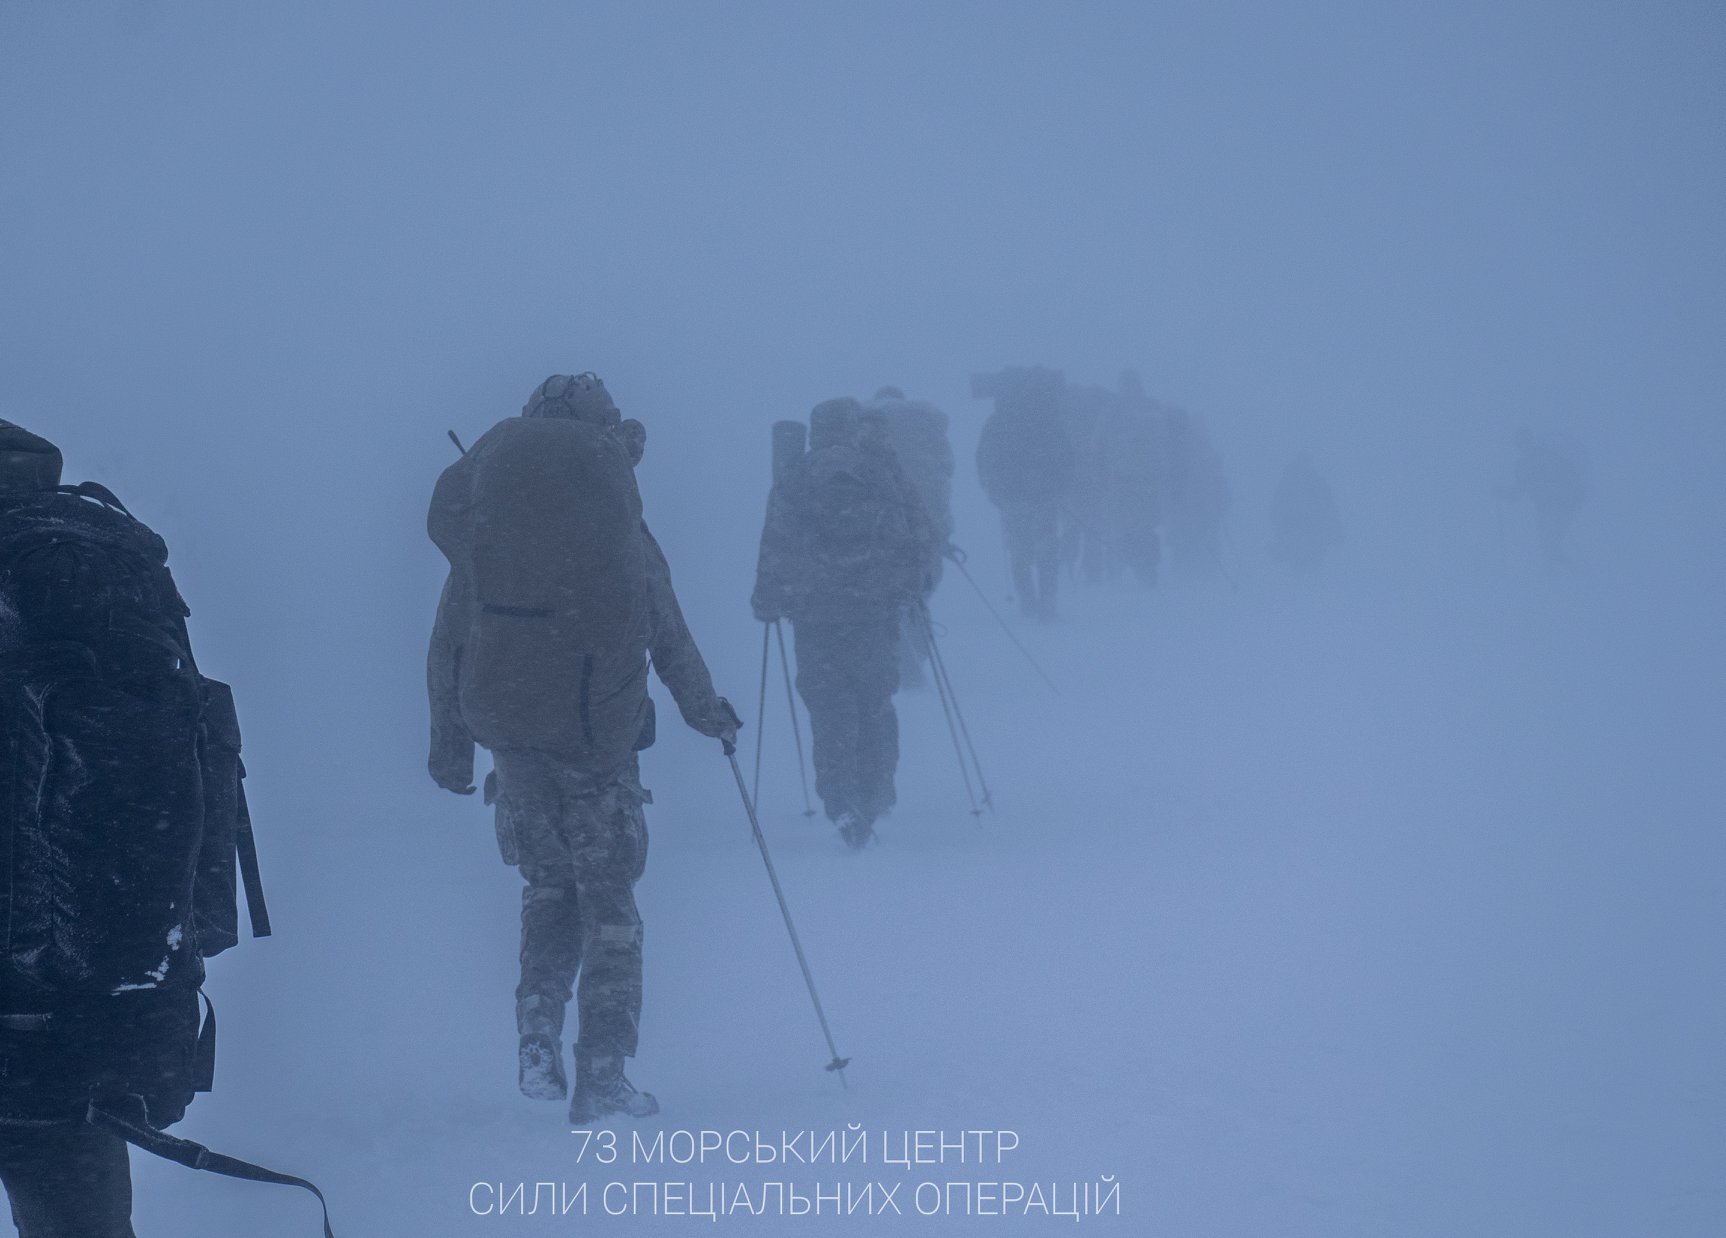 Combat swimmers conducted mountain training exercises in the winter